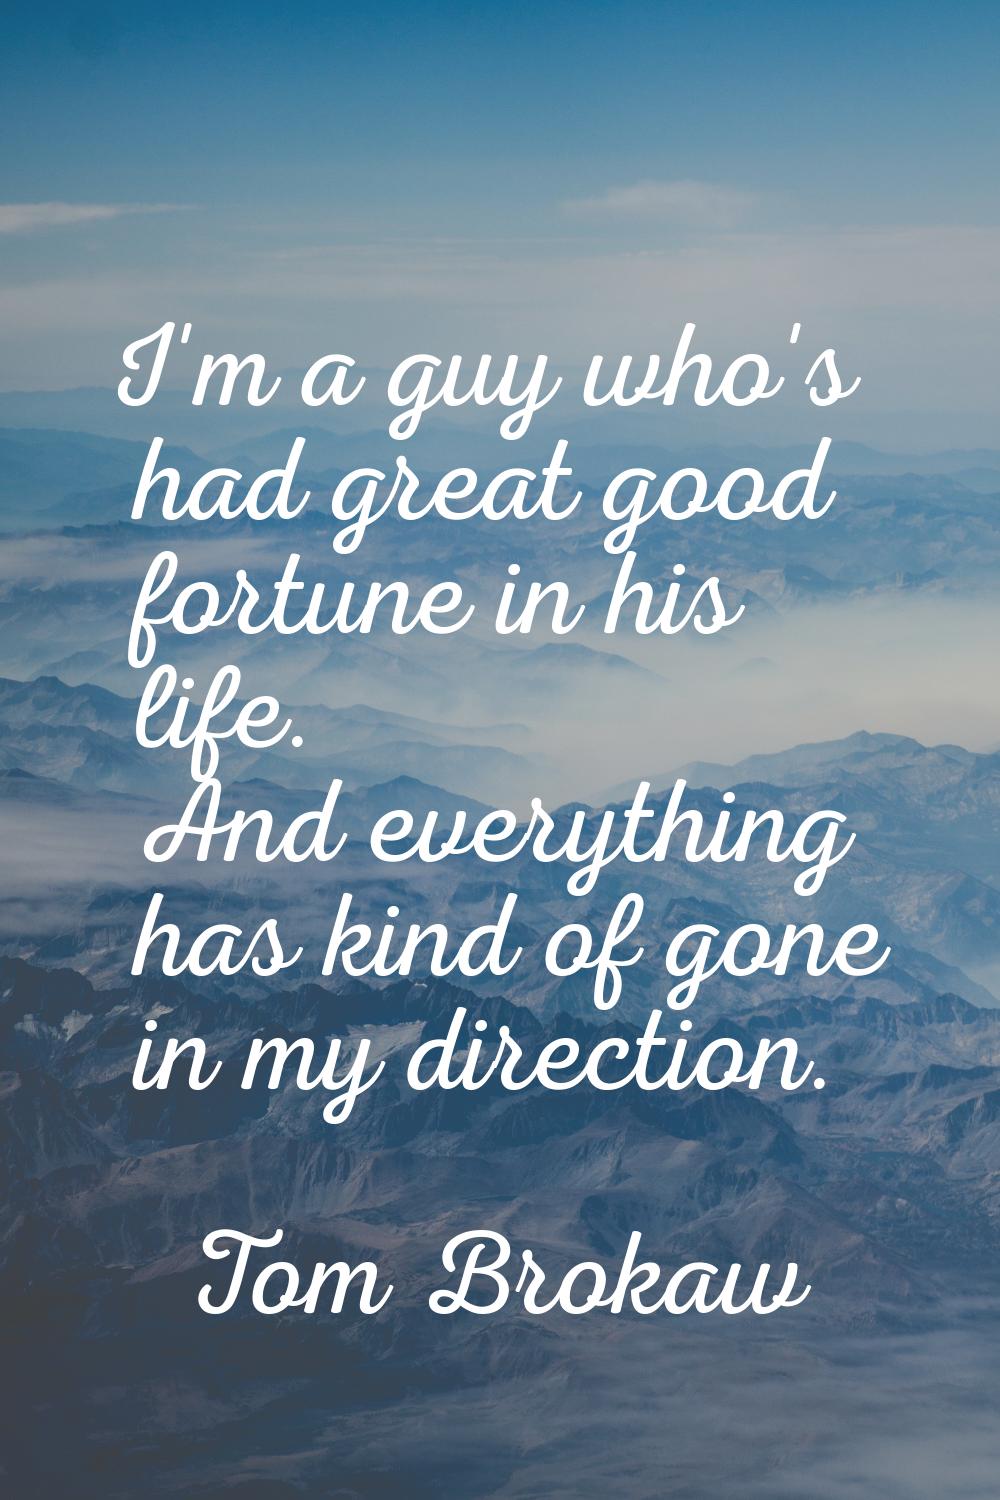 I'm a guy who's had great good fortune in his life. And everything has kind of gone in my direction